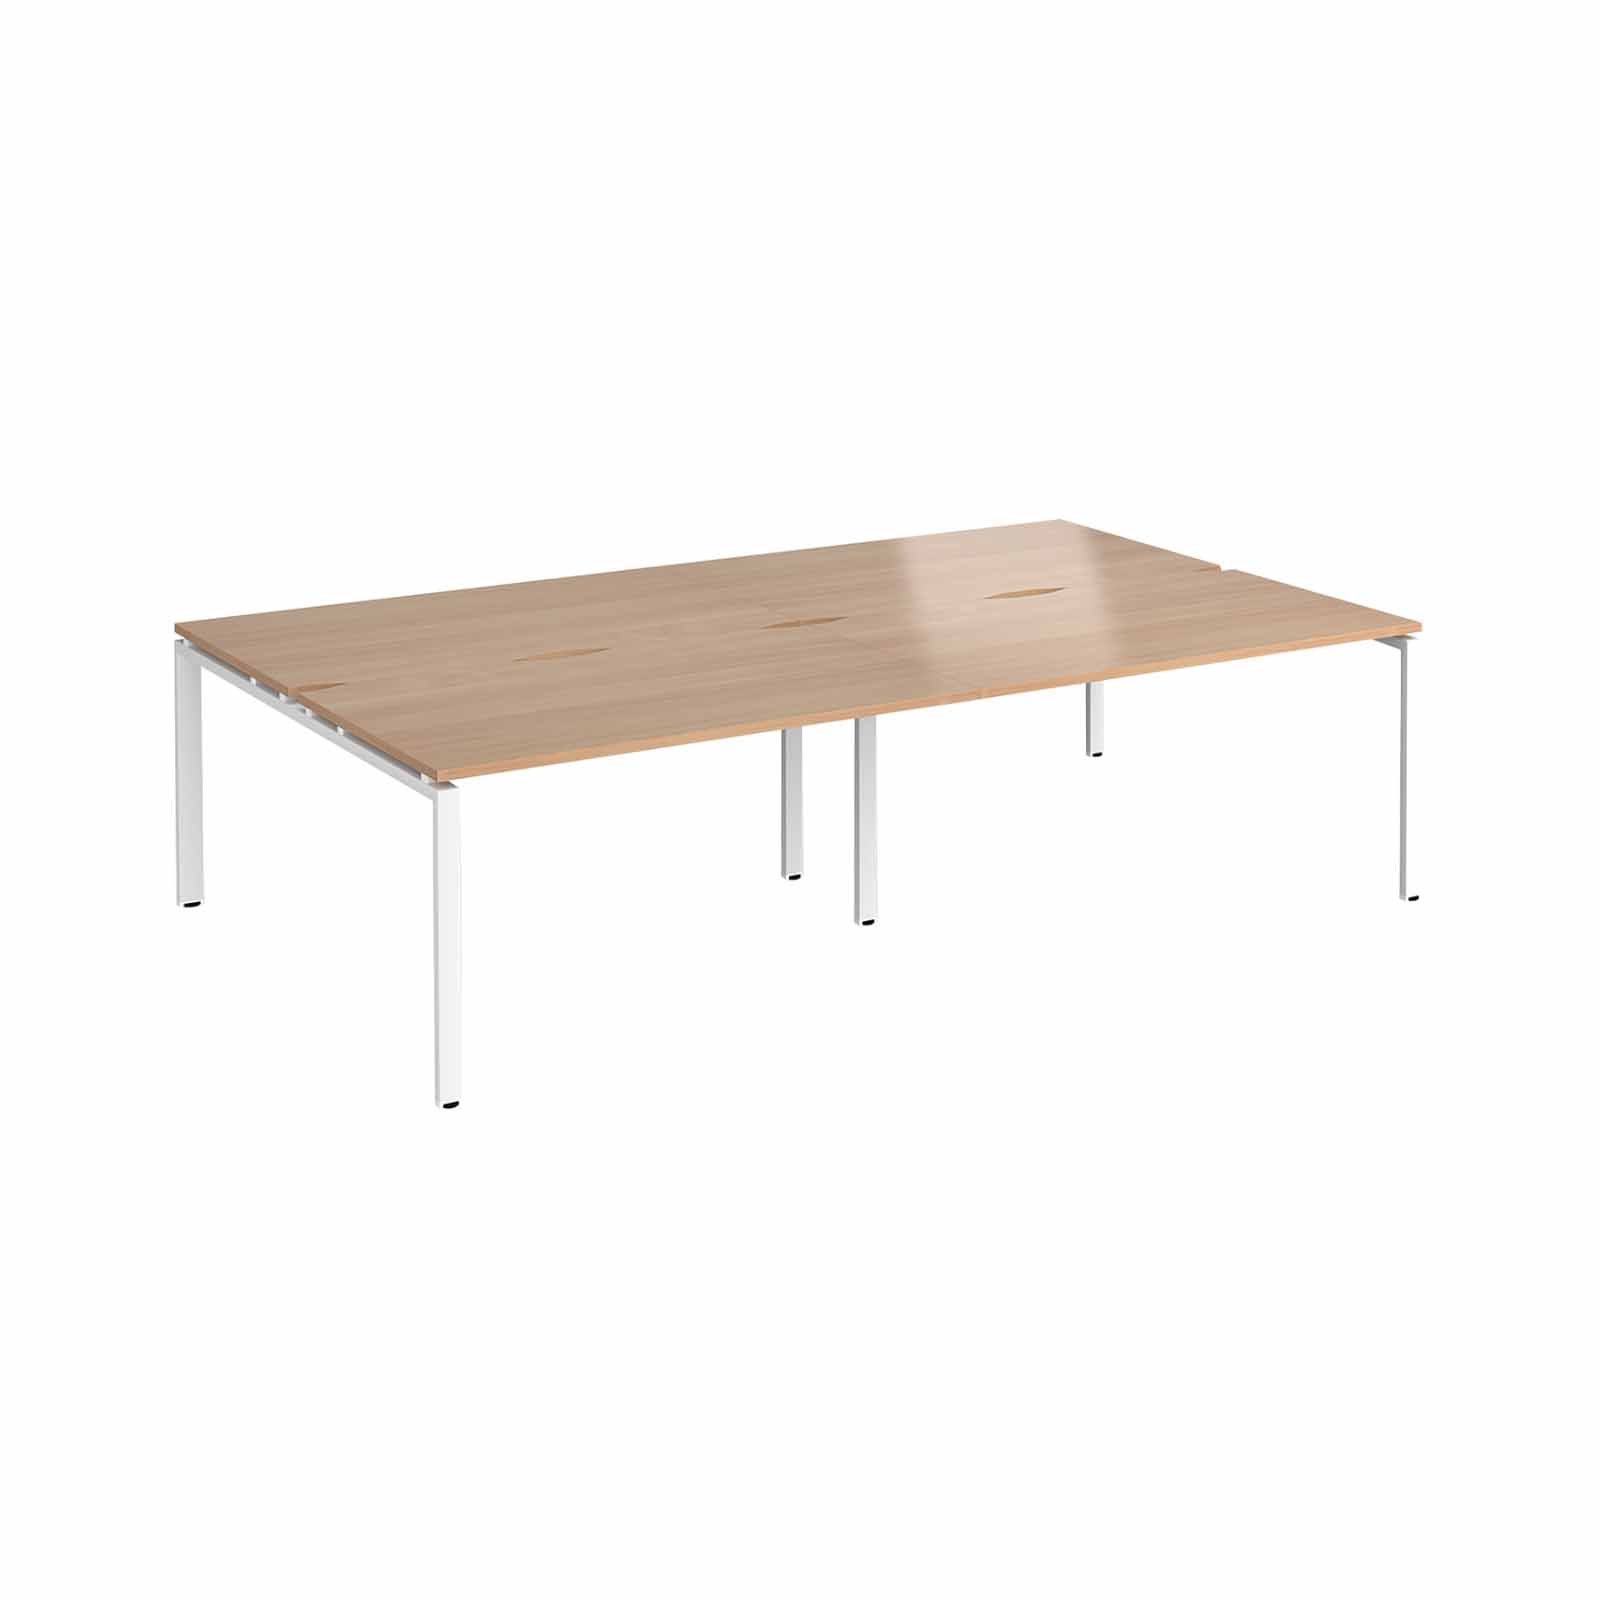 MADE TO ORDER 4 Person - B2B Bench Desk W1000mm x D600mm x H740mm